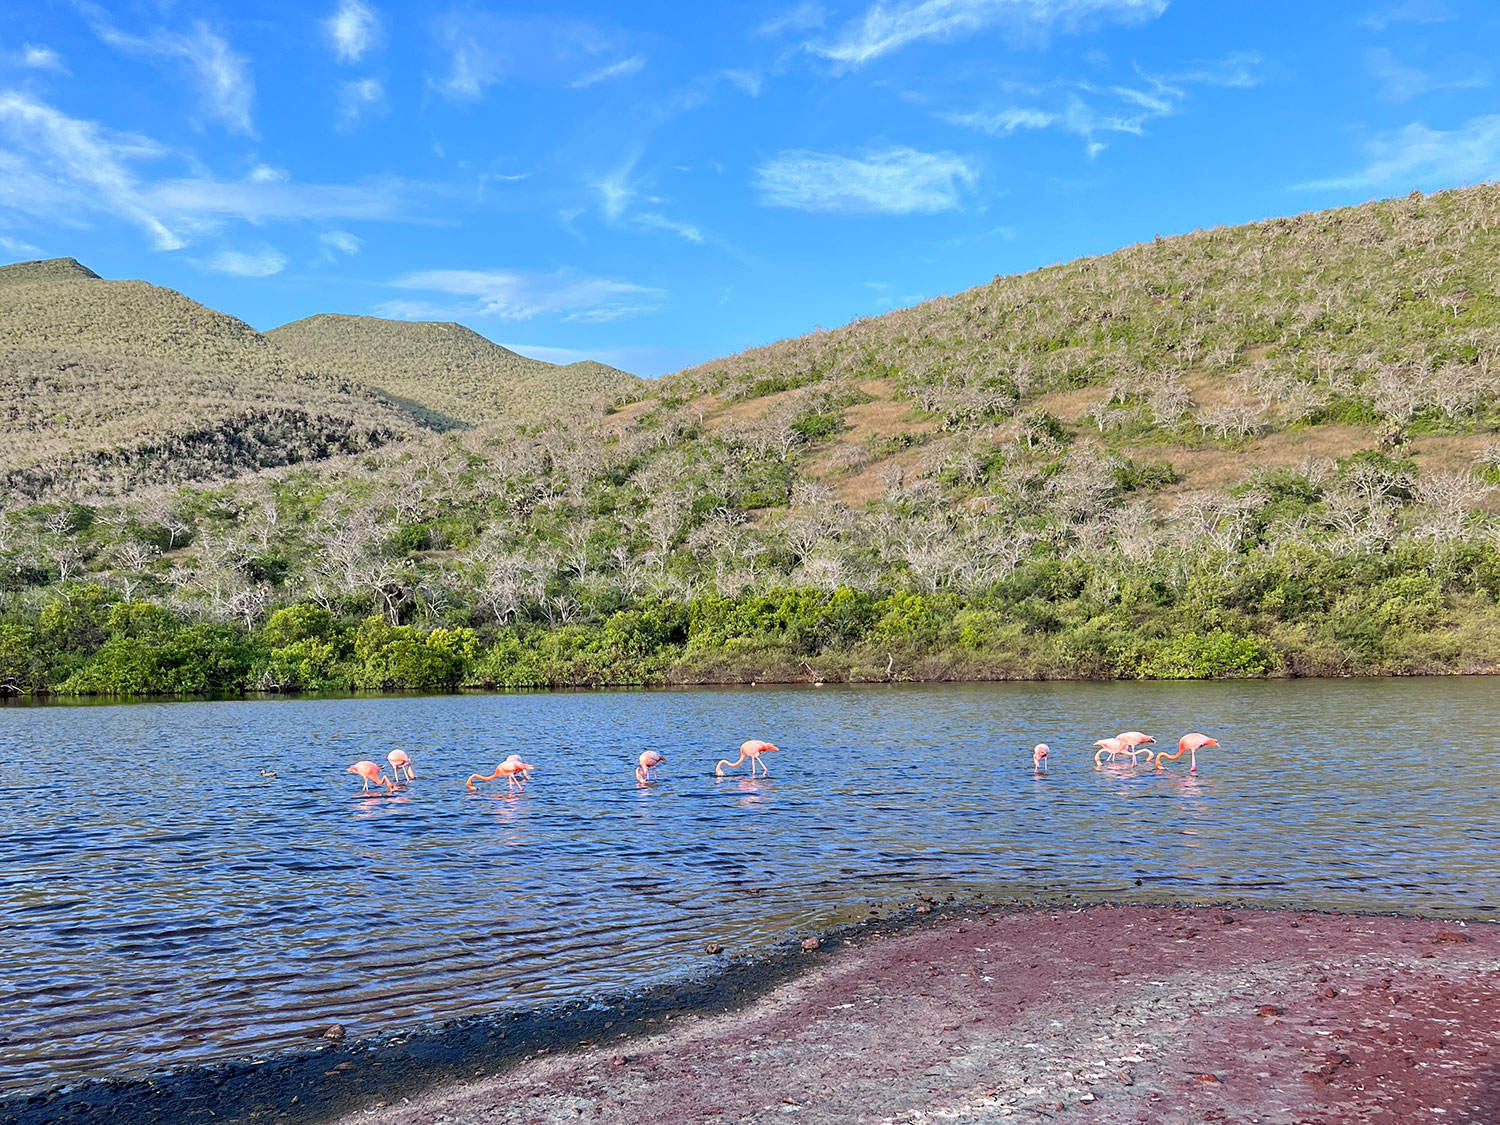 A flamboyance of flamingos in the Galapagos Islands